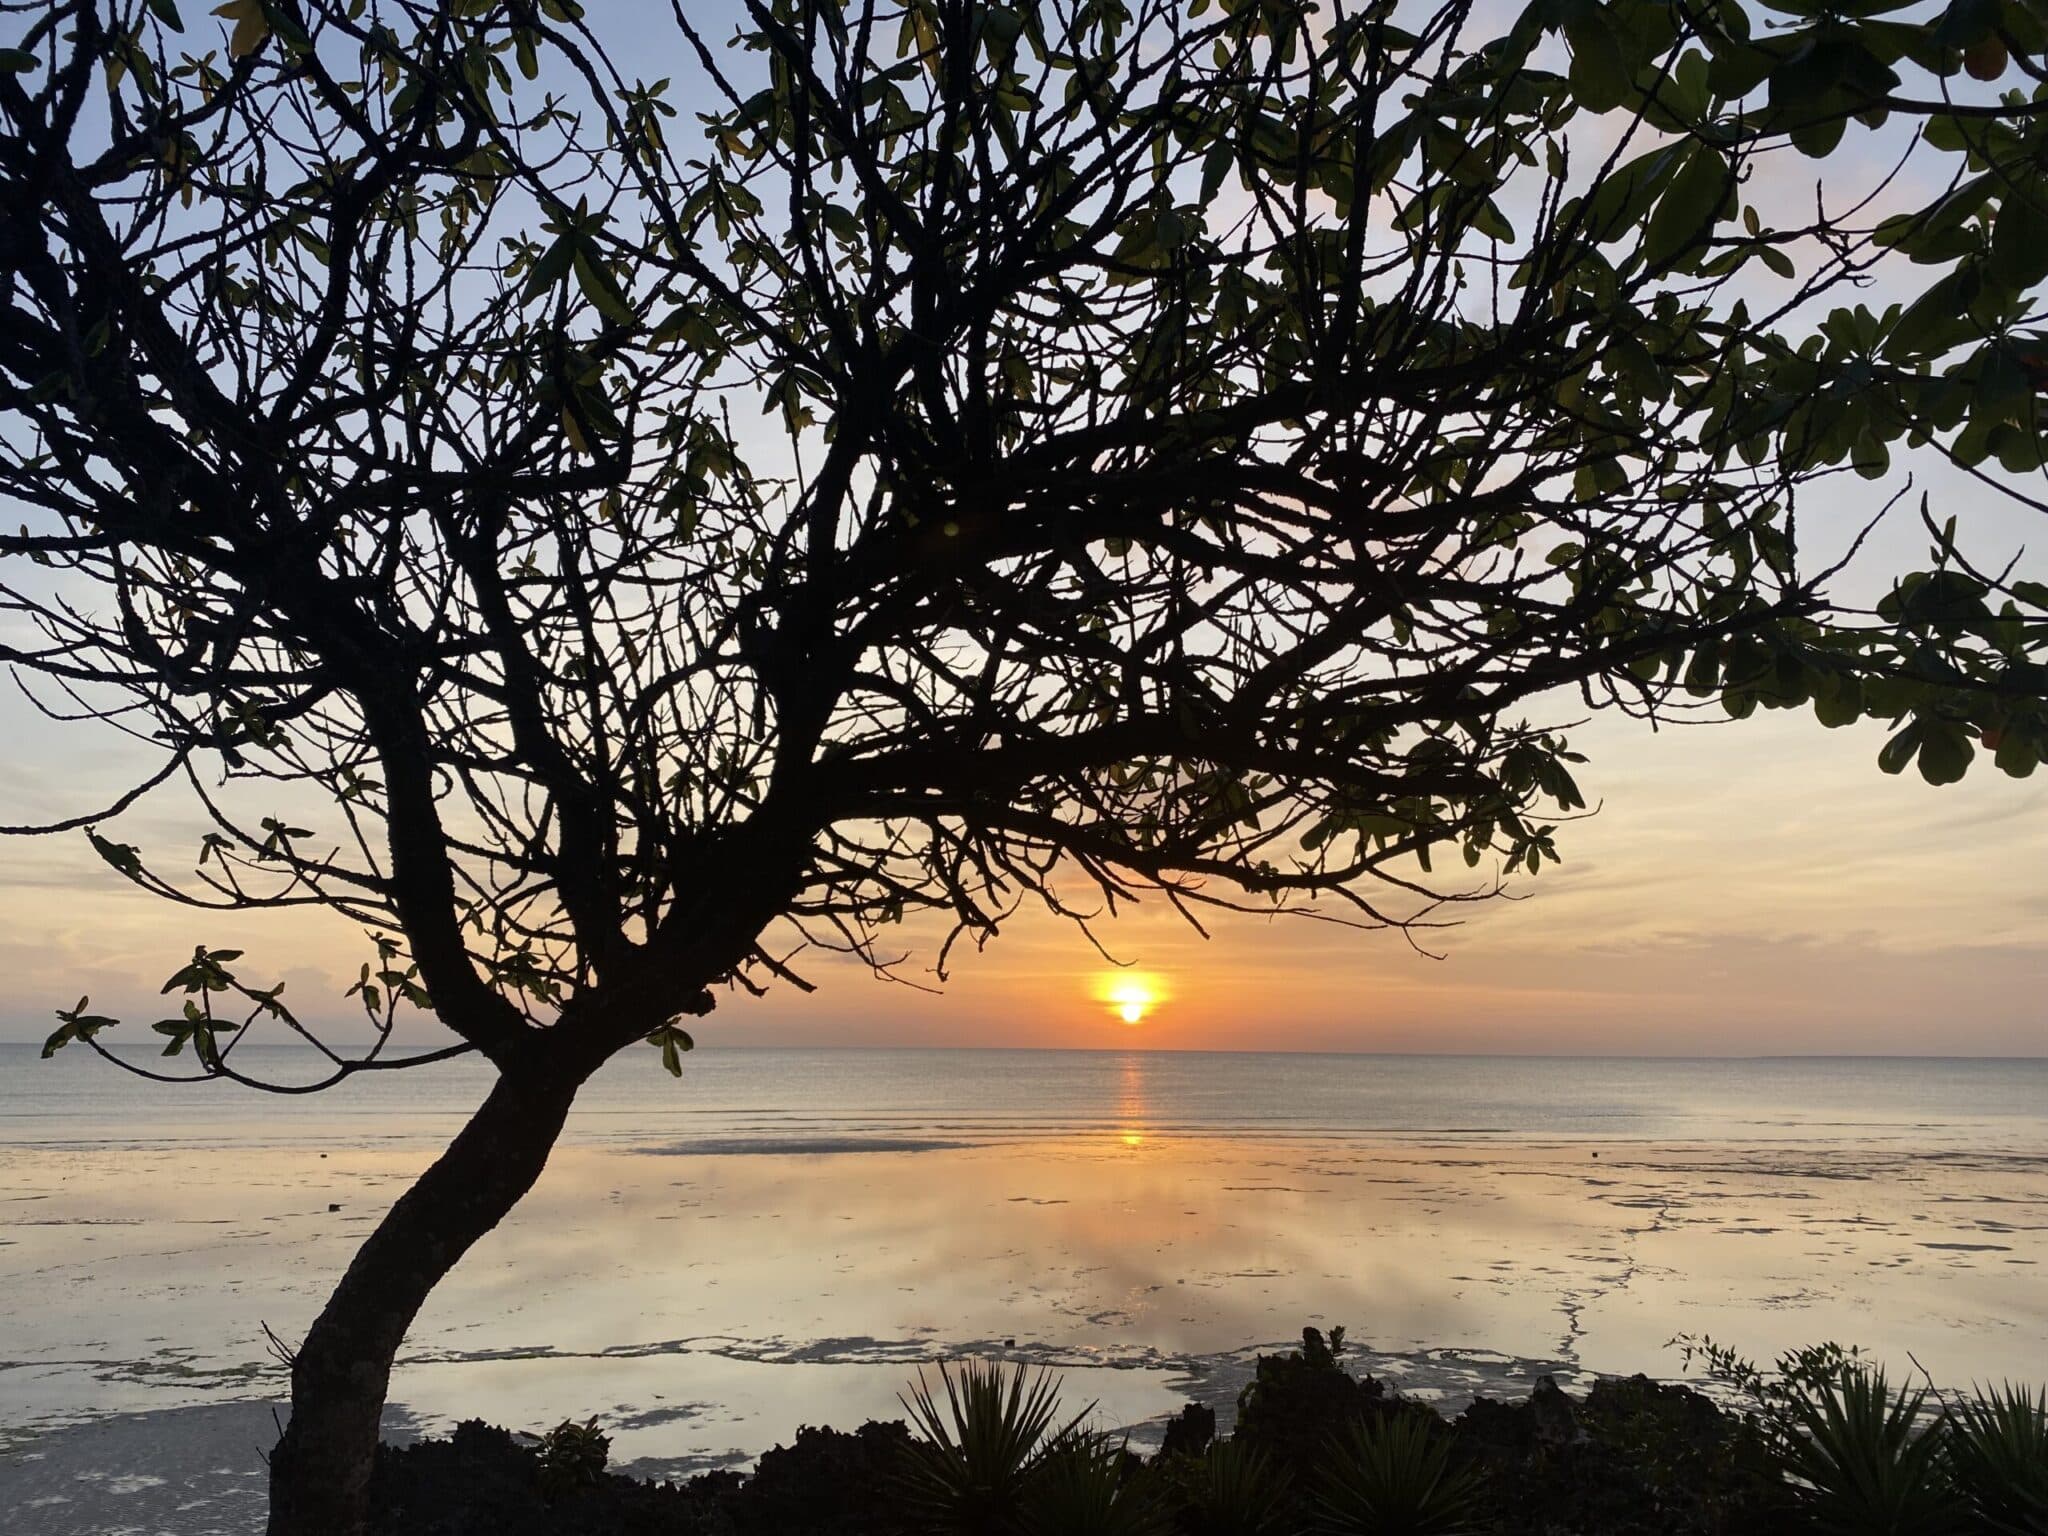 sunset in zanzibar taking in the view of the trees on the beach as well